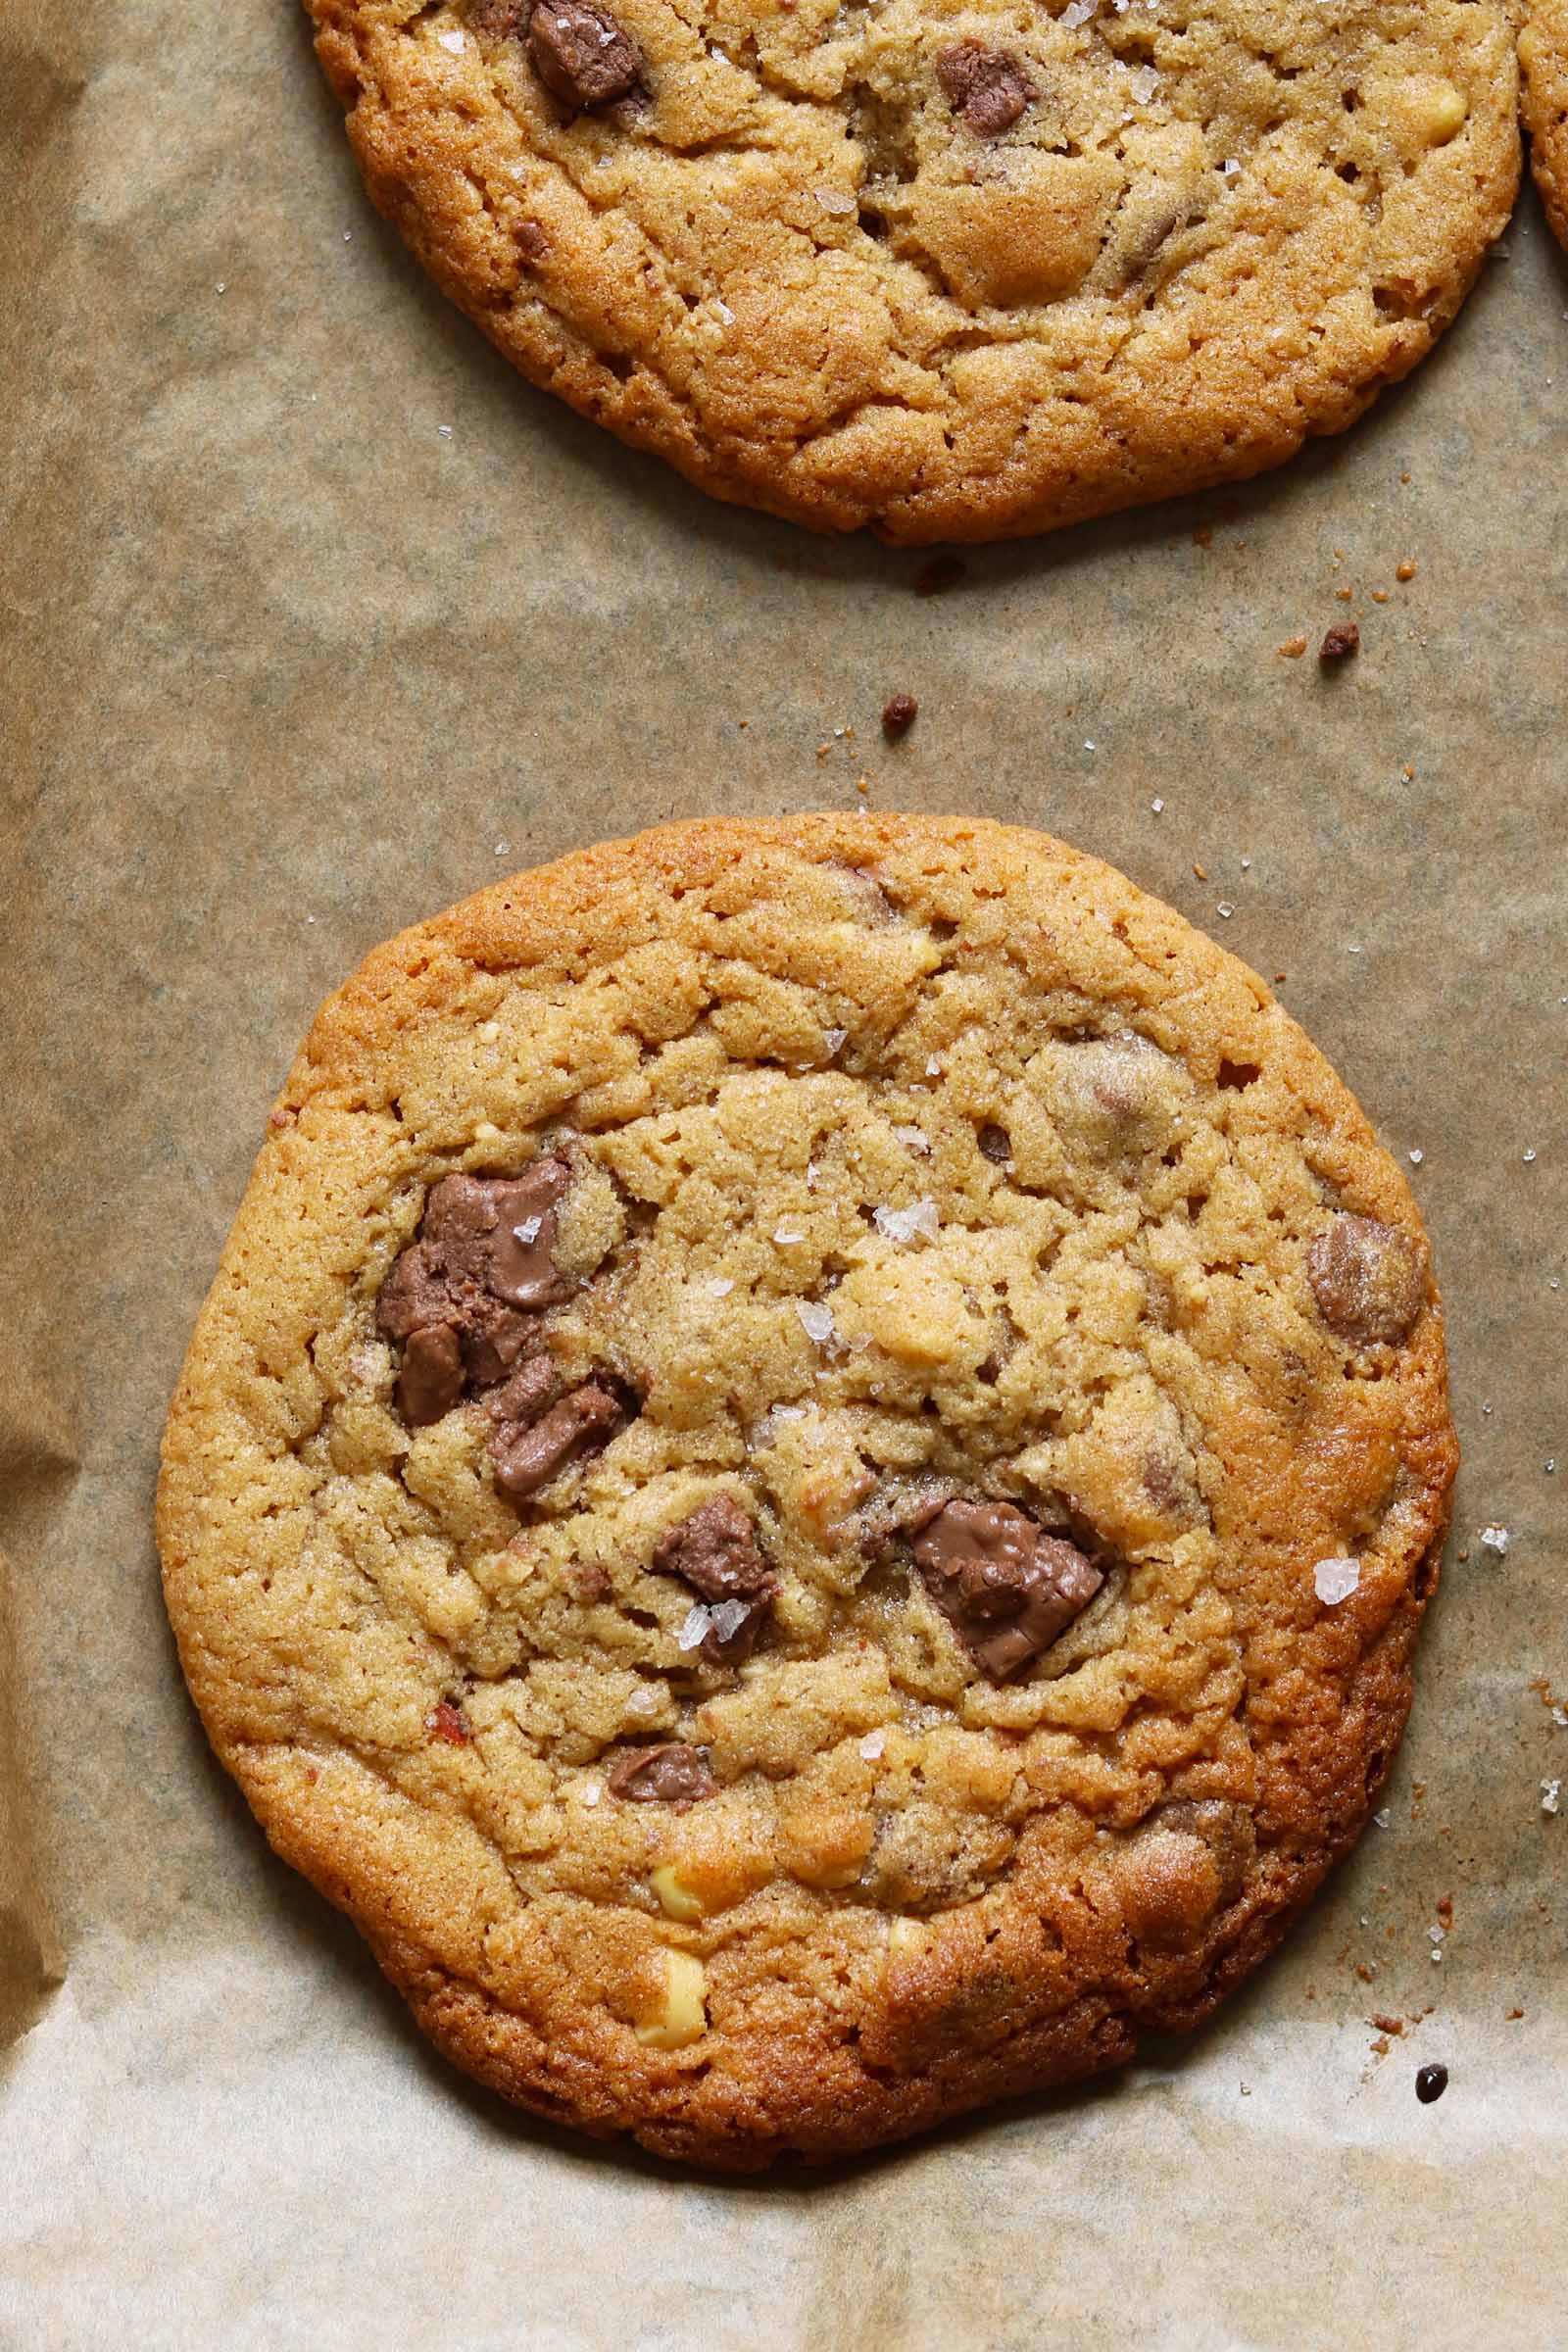 Peanut butter Chocolate Chip Cookies Recipe Beautiful Peanut butter Chocolate Chip Cookies the Last Food Blog